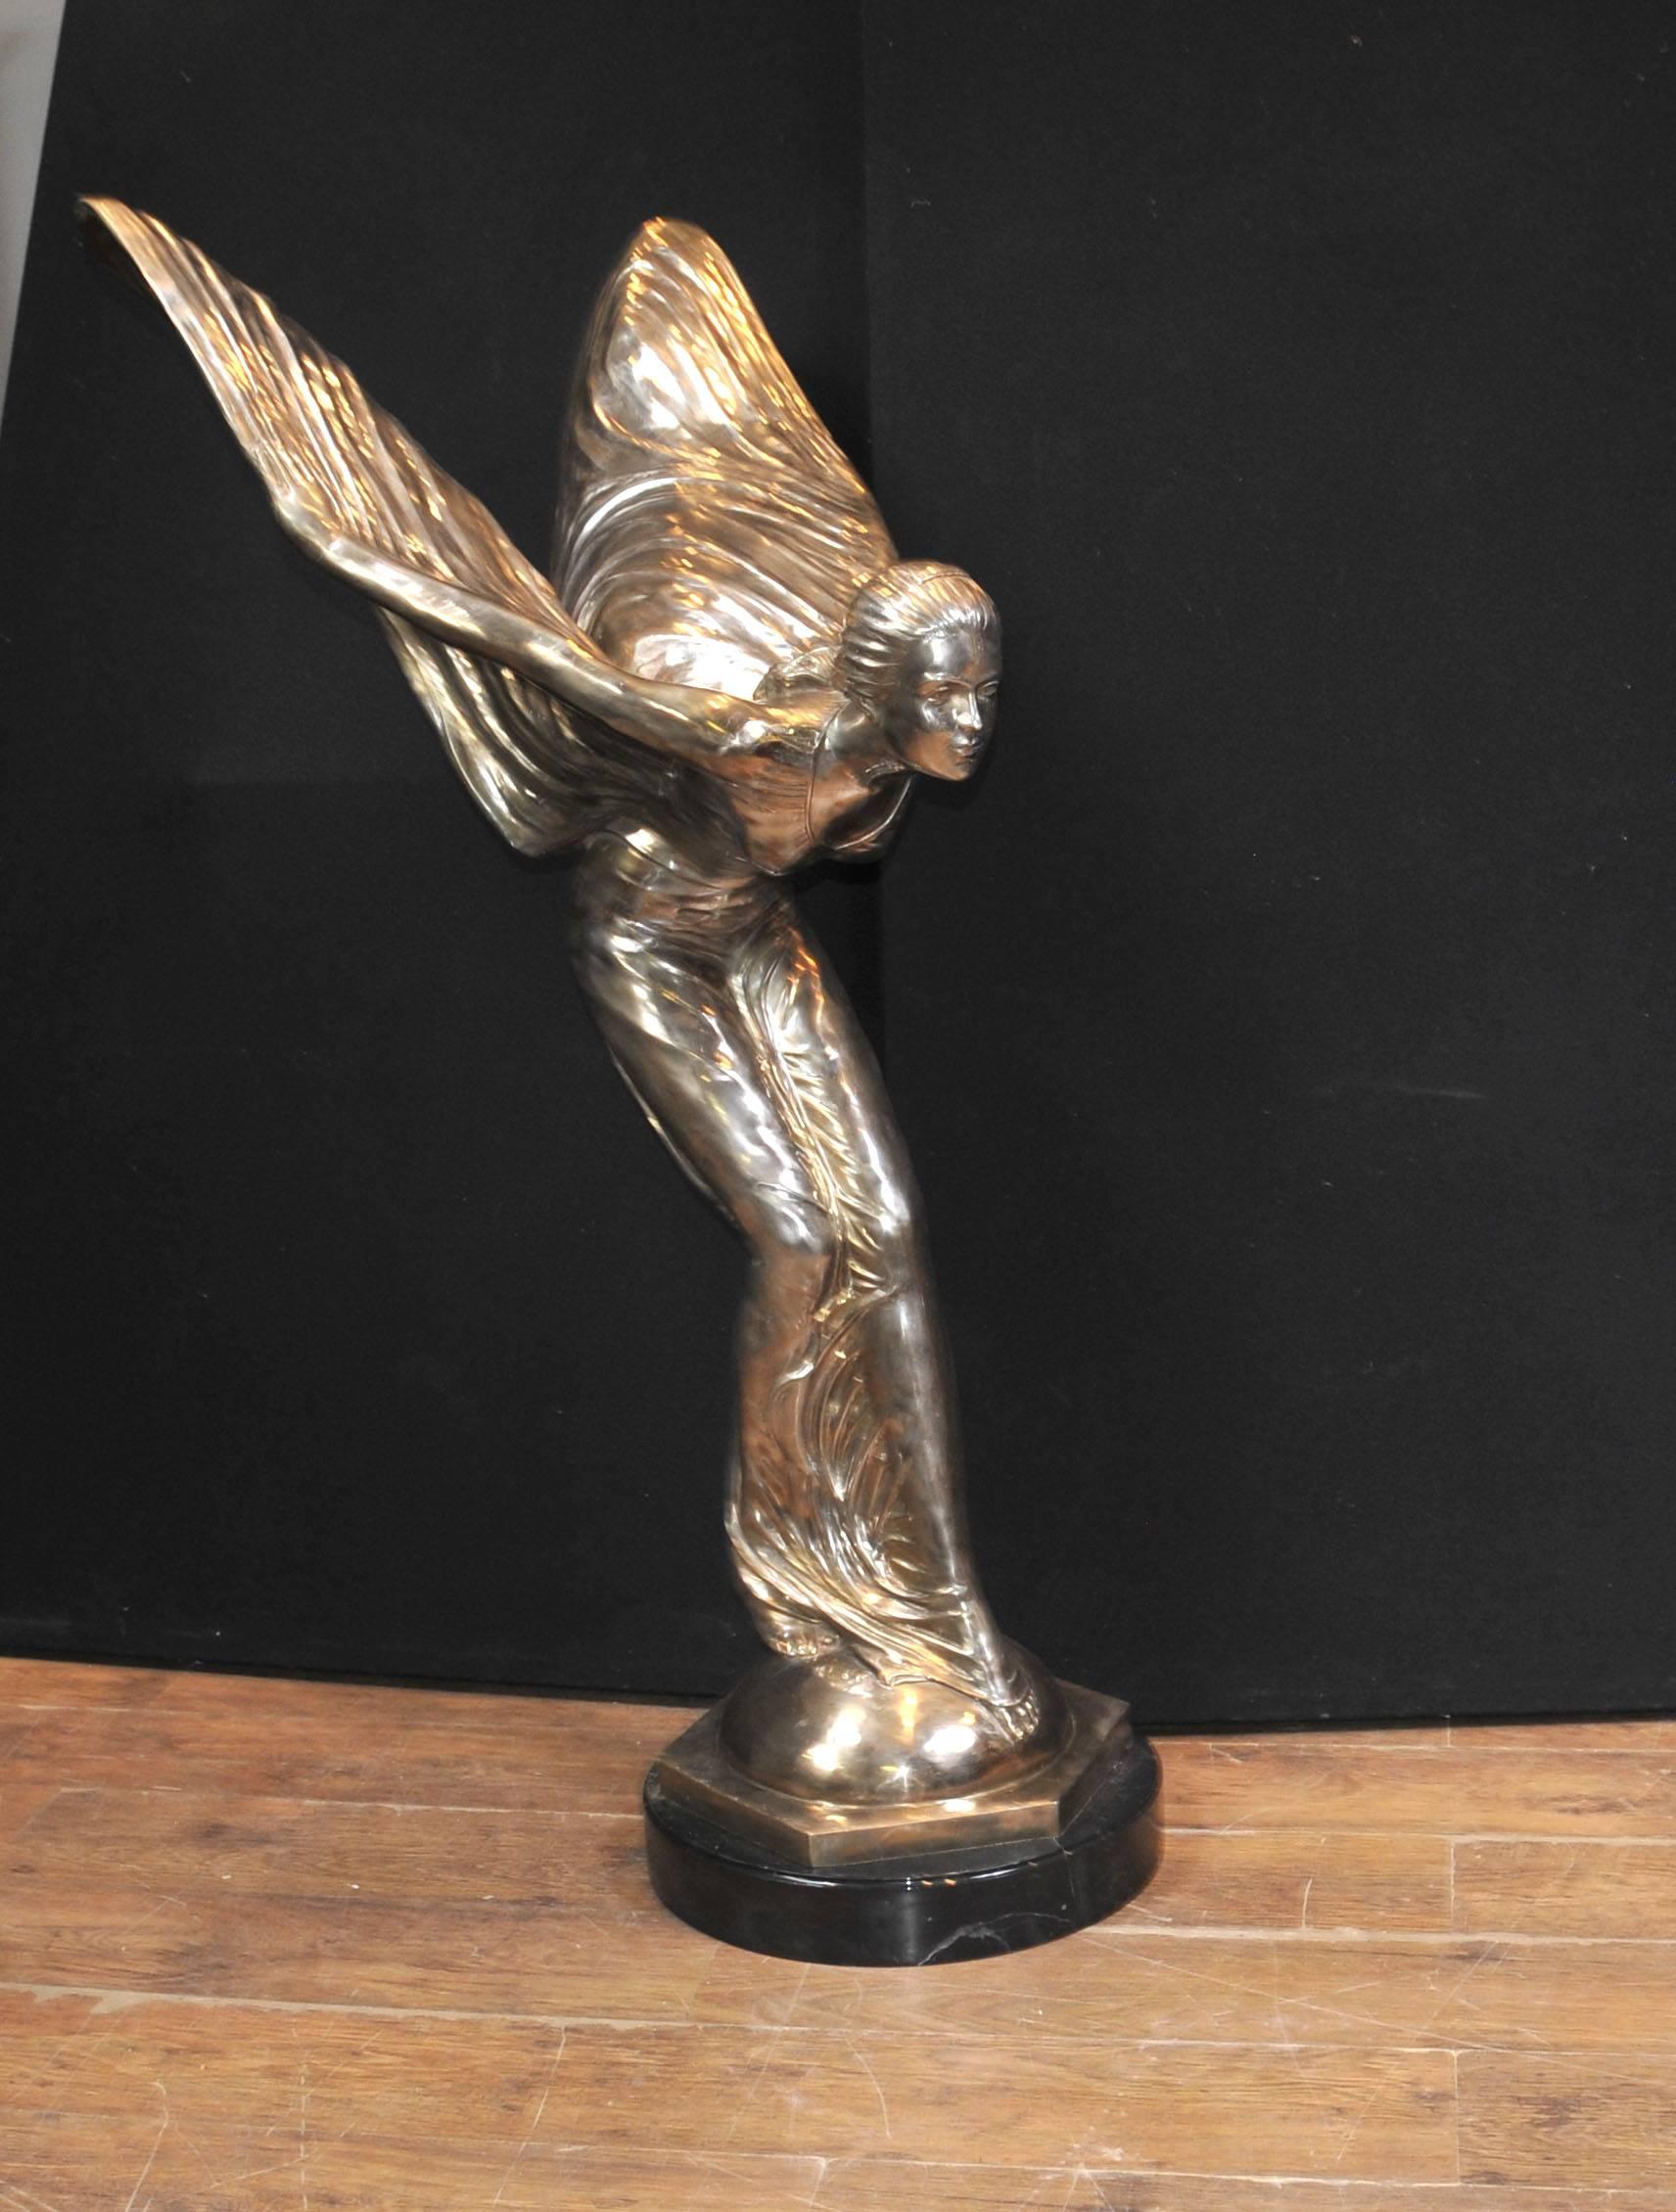 Come view this gorgeous Flying Lady / Spirit Ecstacy in our Hertfordshire warehouse.
Wonderful art nouveau style bronze casting of the famous Rolls Royce car statue by Charles Sykes.
This is a later recast from the original and stands in at nearly